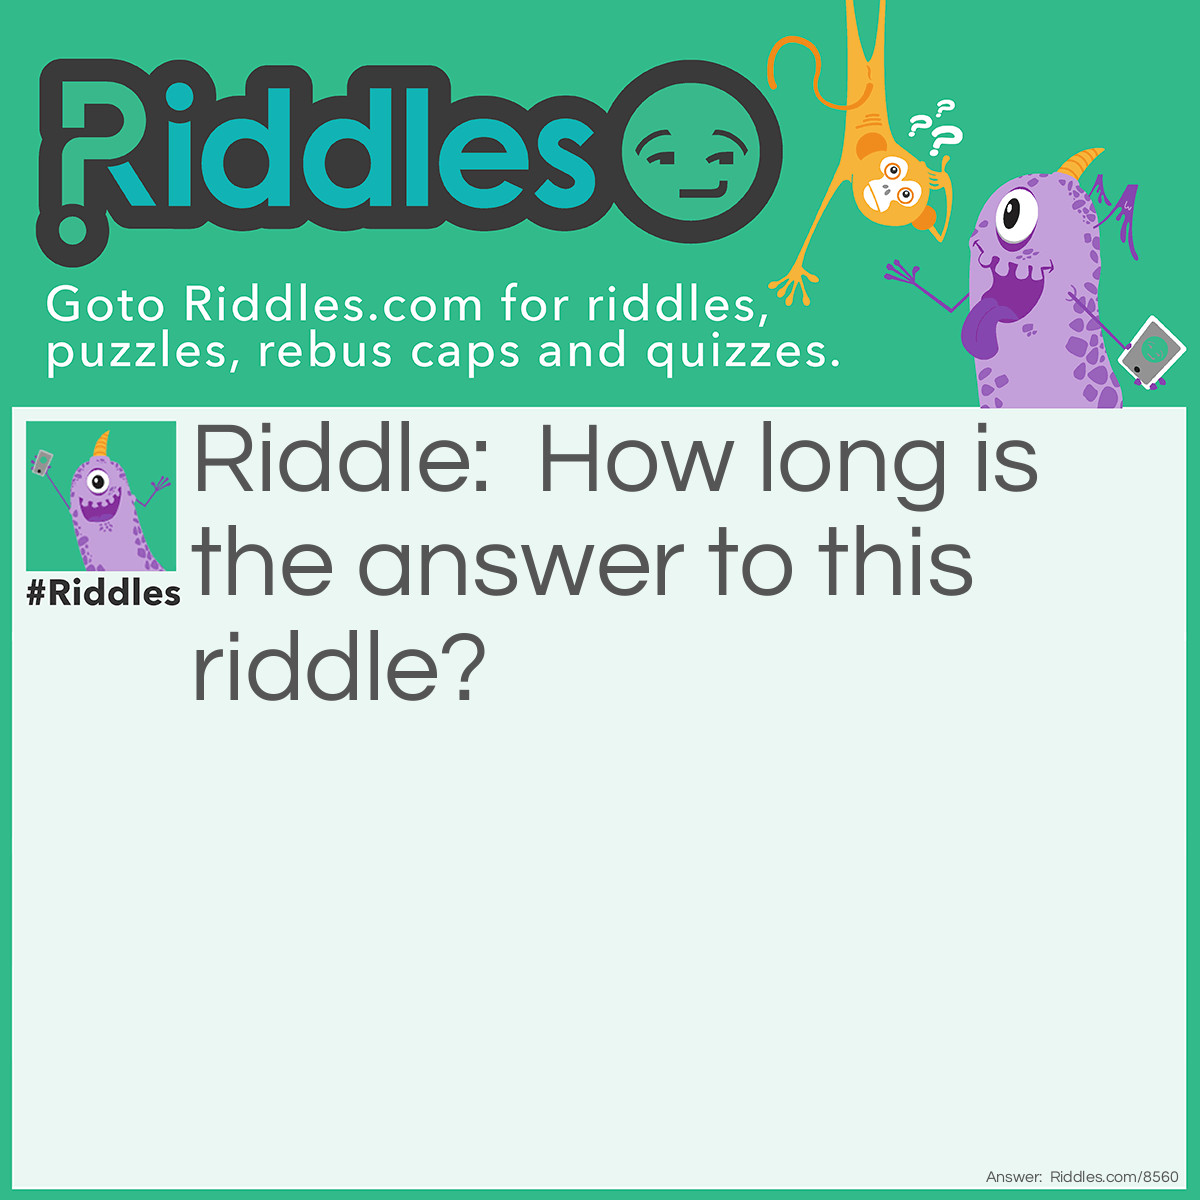 Riddle: How long is the answer to this riddle? Answer: How long!